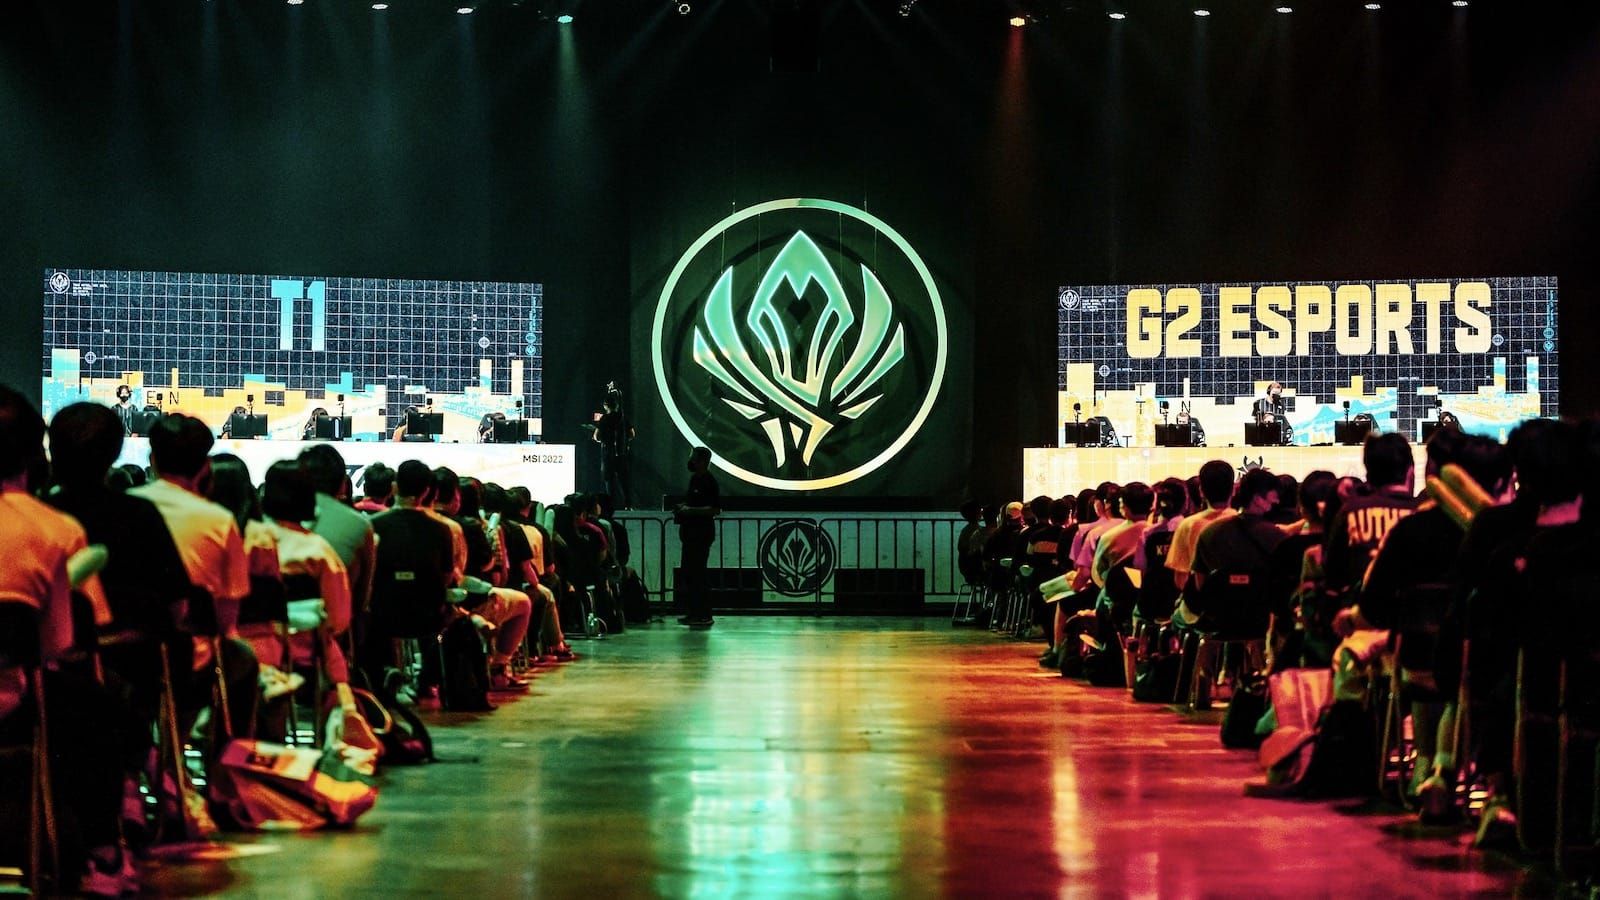 View of the stage from the crowd as T1 (left) face G2 (right) in League of Legends MSI tournament